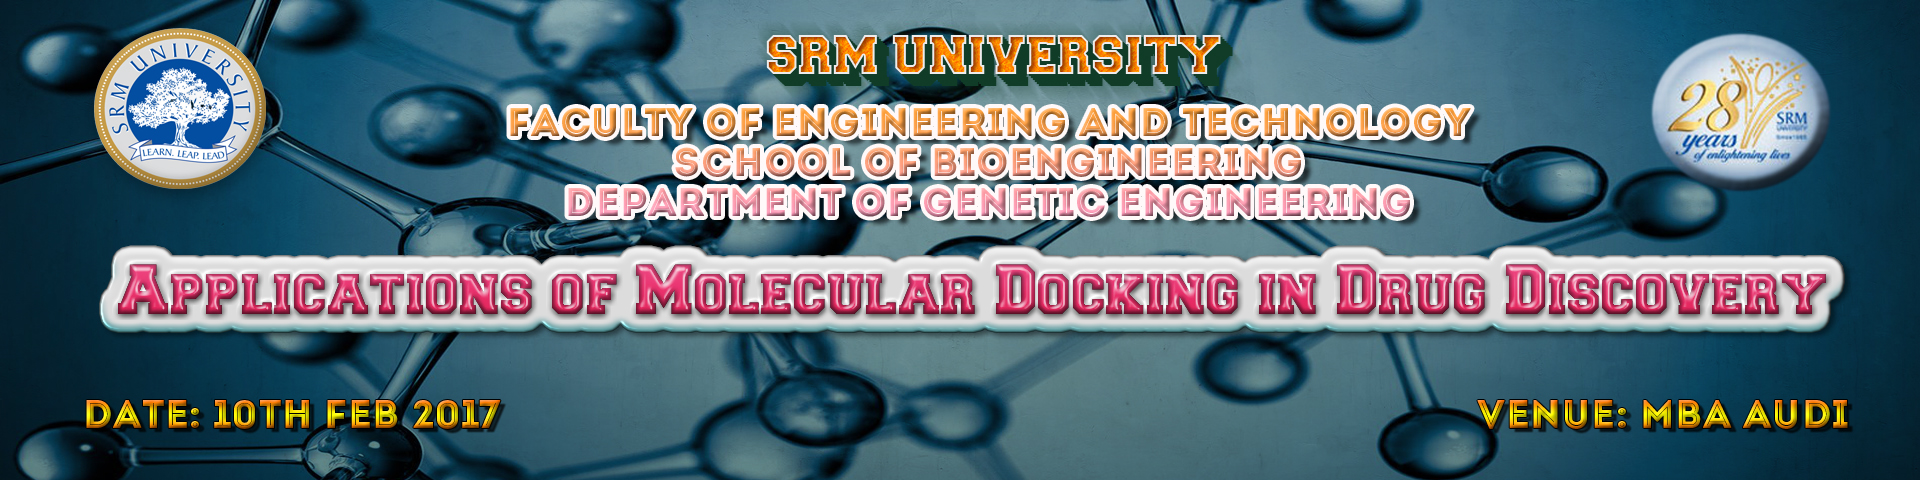 Applications of Molecular Docking in Drug Discovery